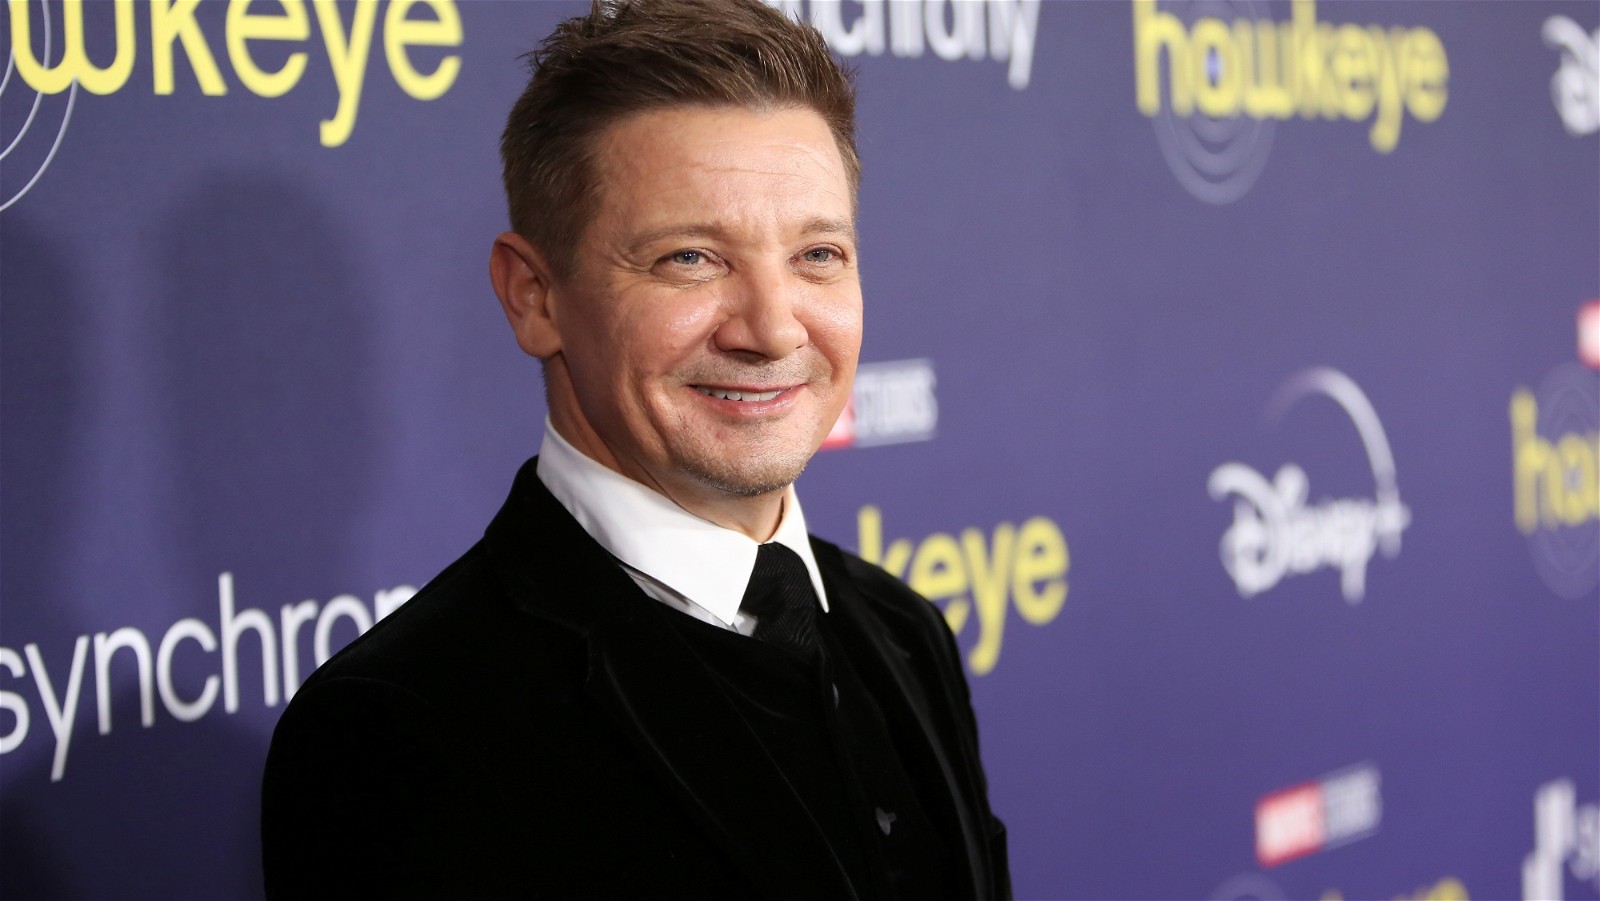 Jeremy Renner at the premiere of Hawkeye